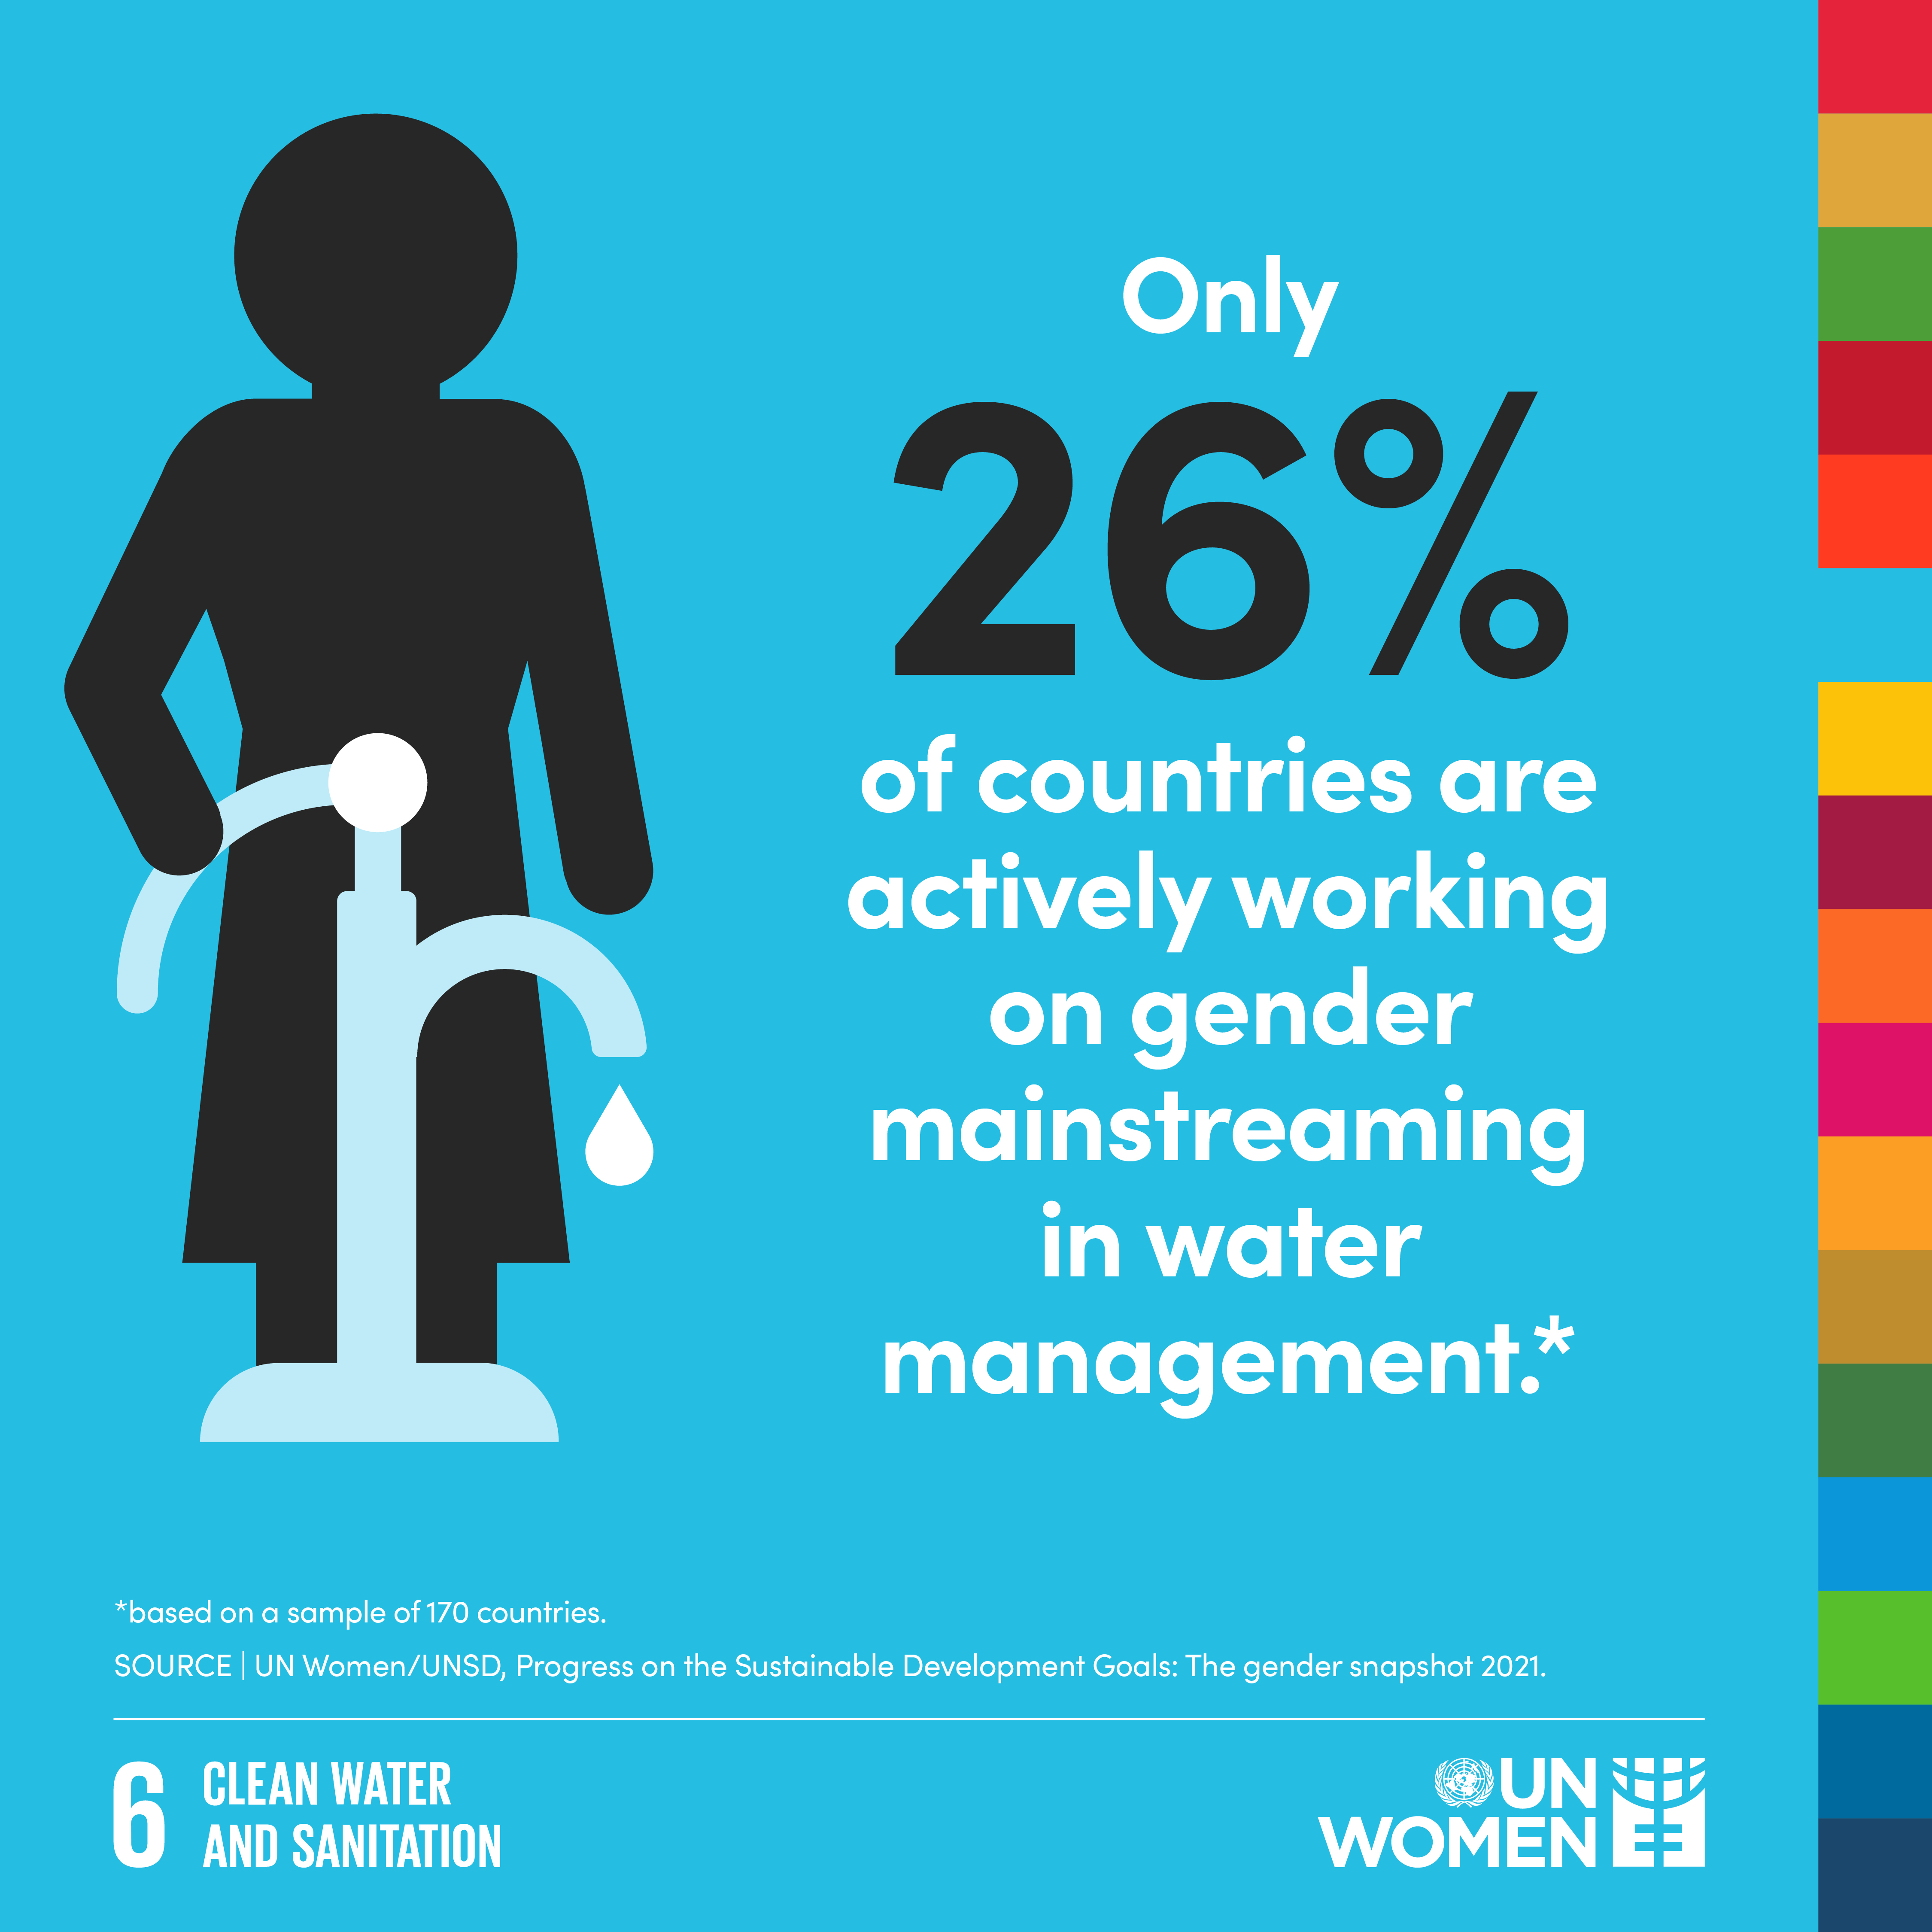 Only 26% of countries are actively working on gender mainstreaming in water management. 